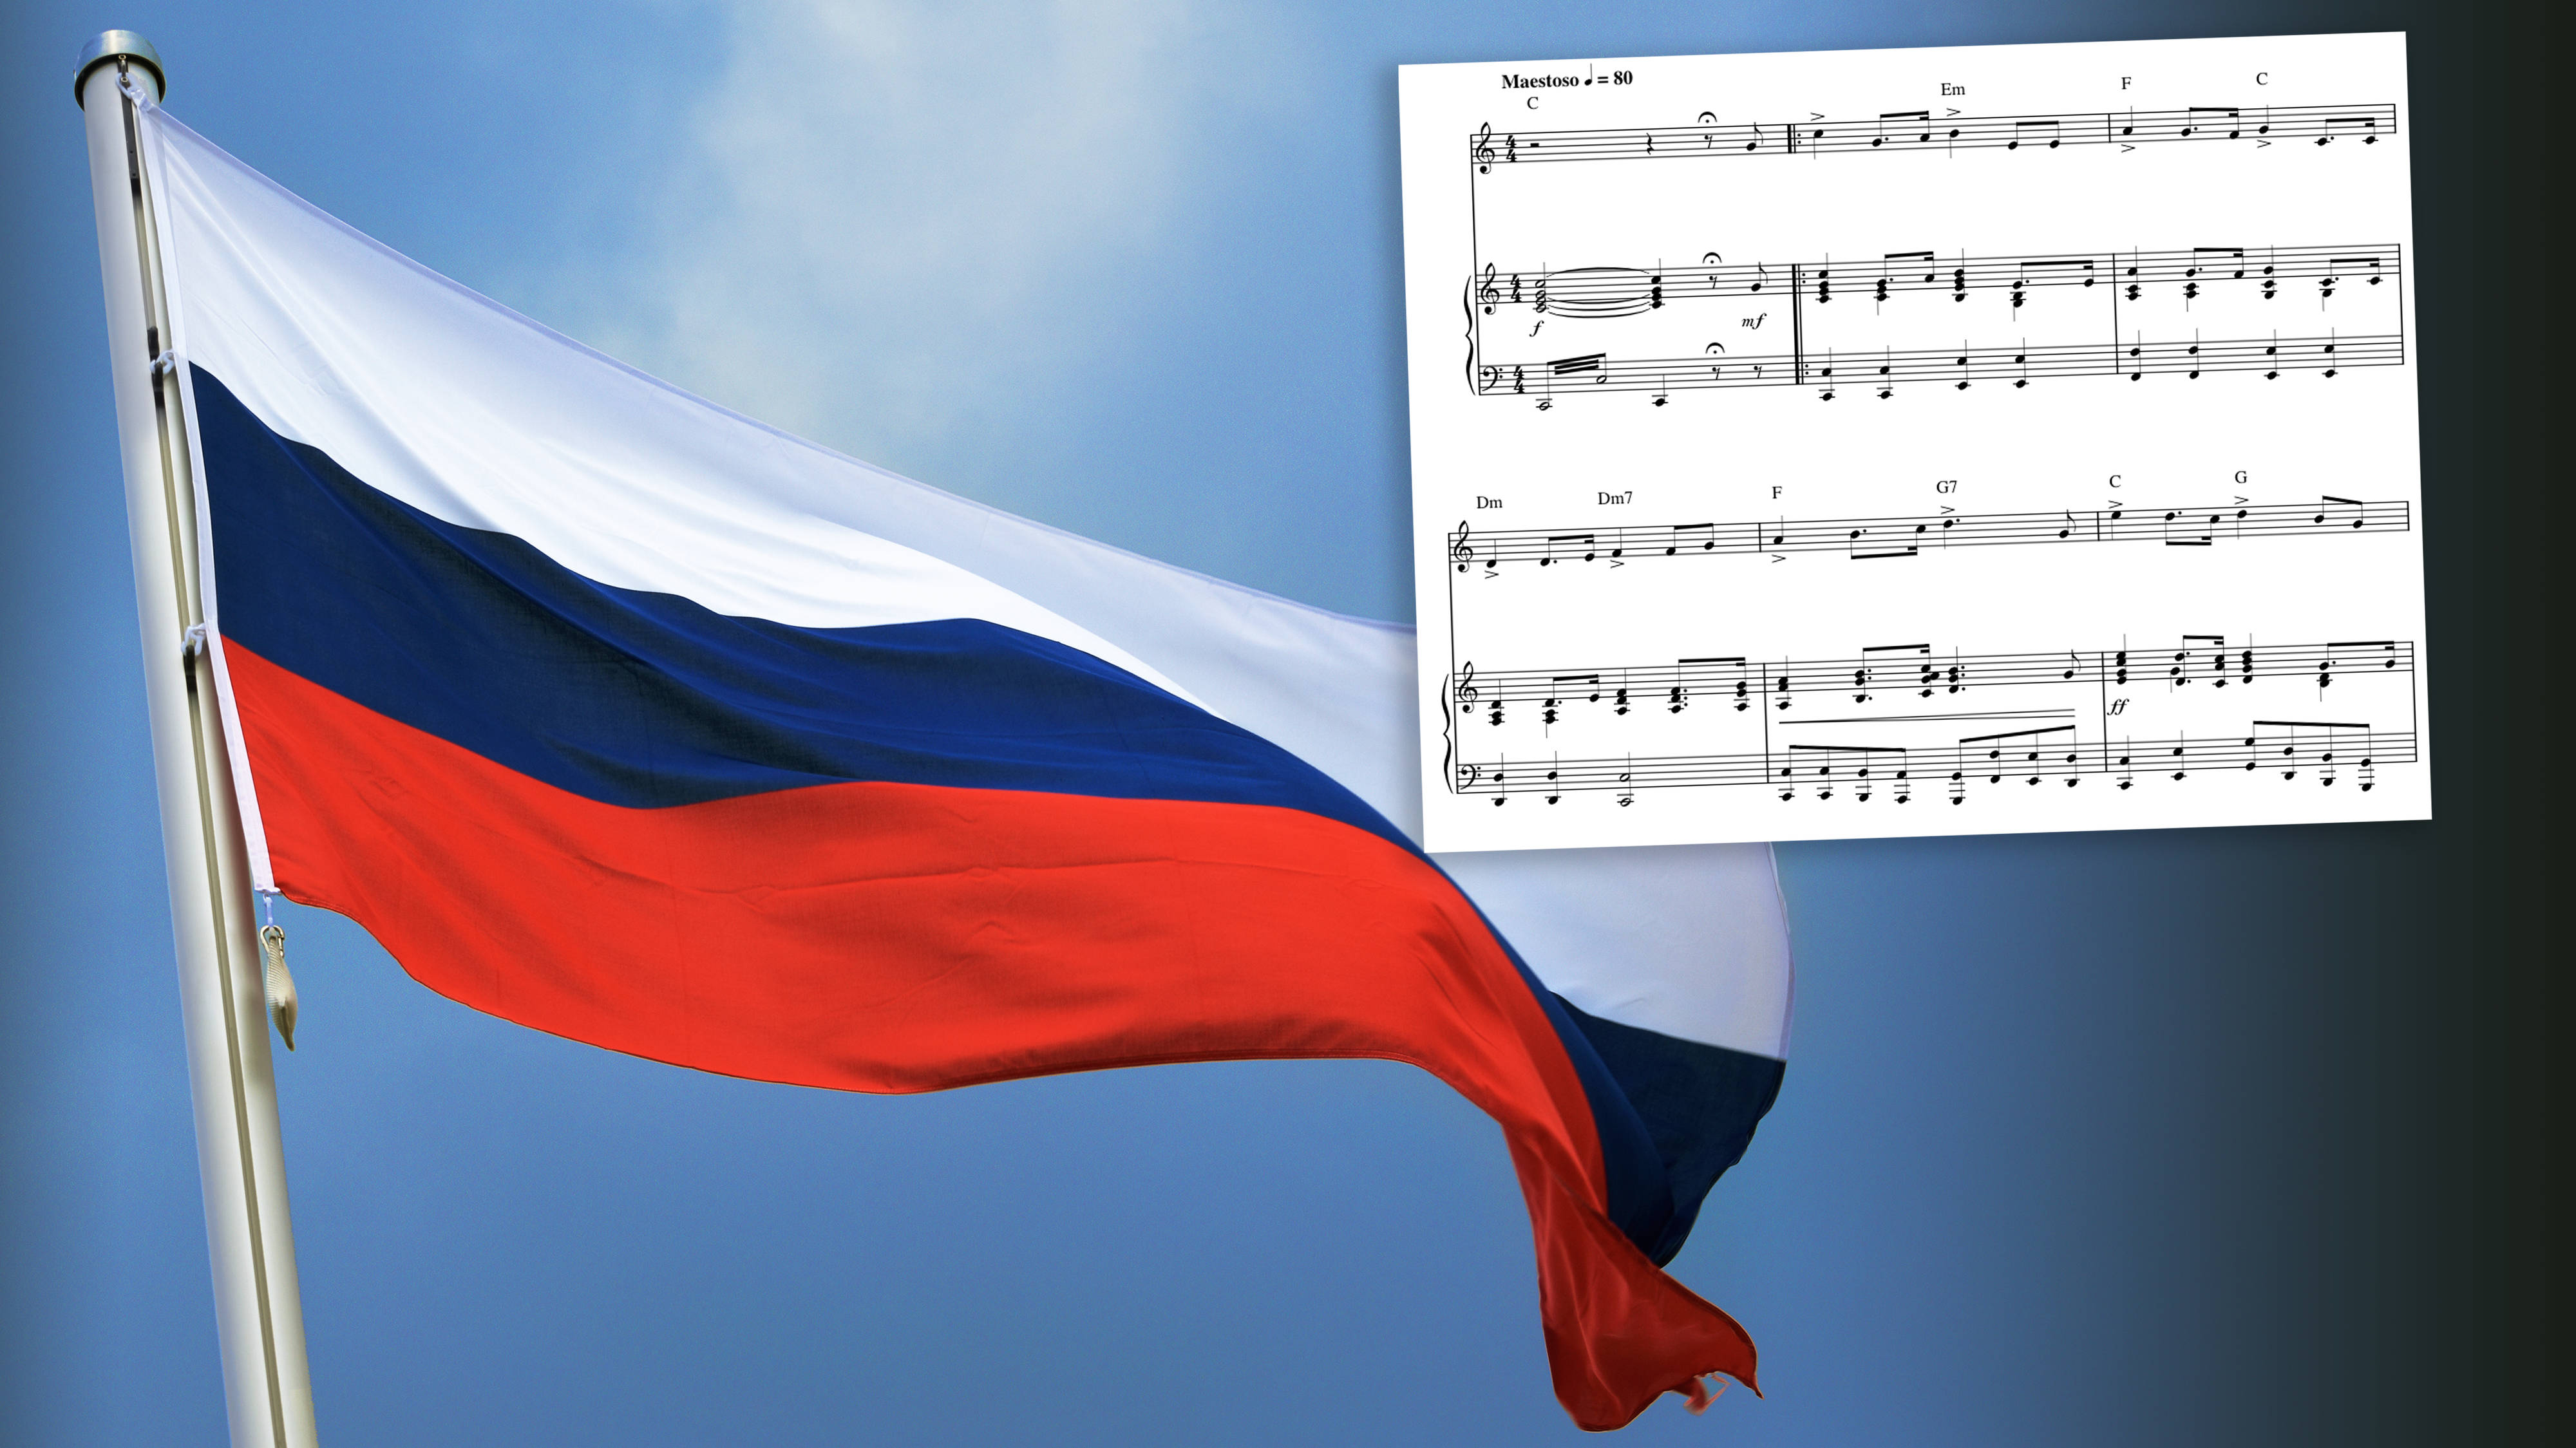 What are the lyrics to Russia's national anthem, and what do they